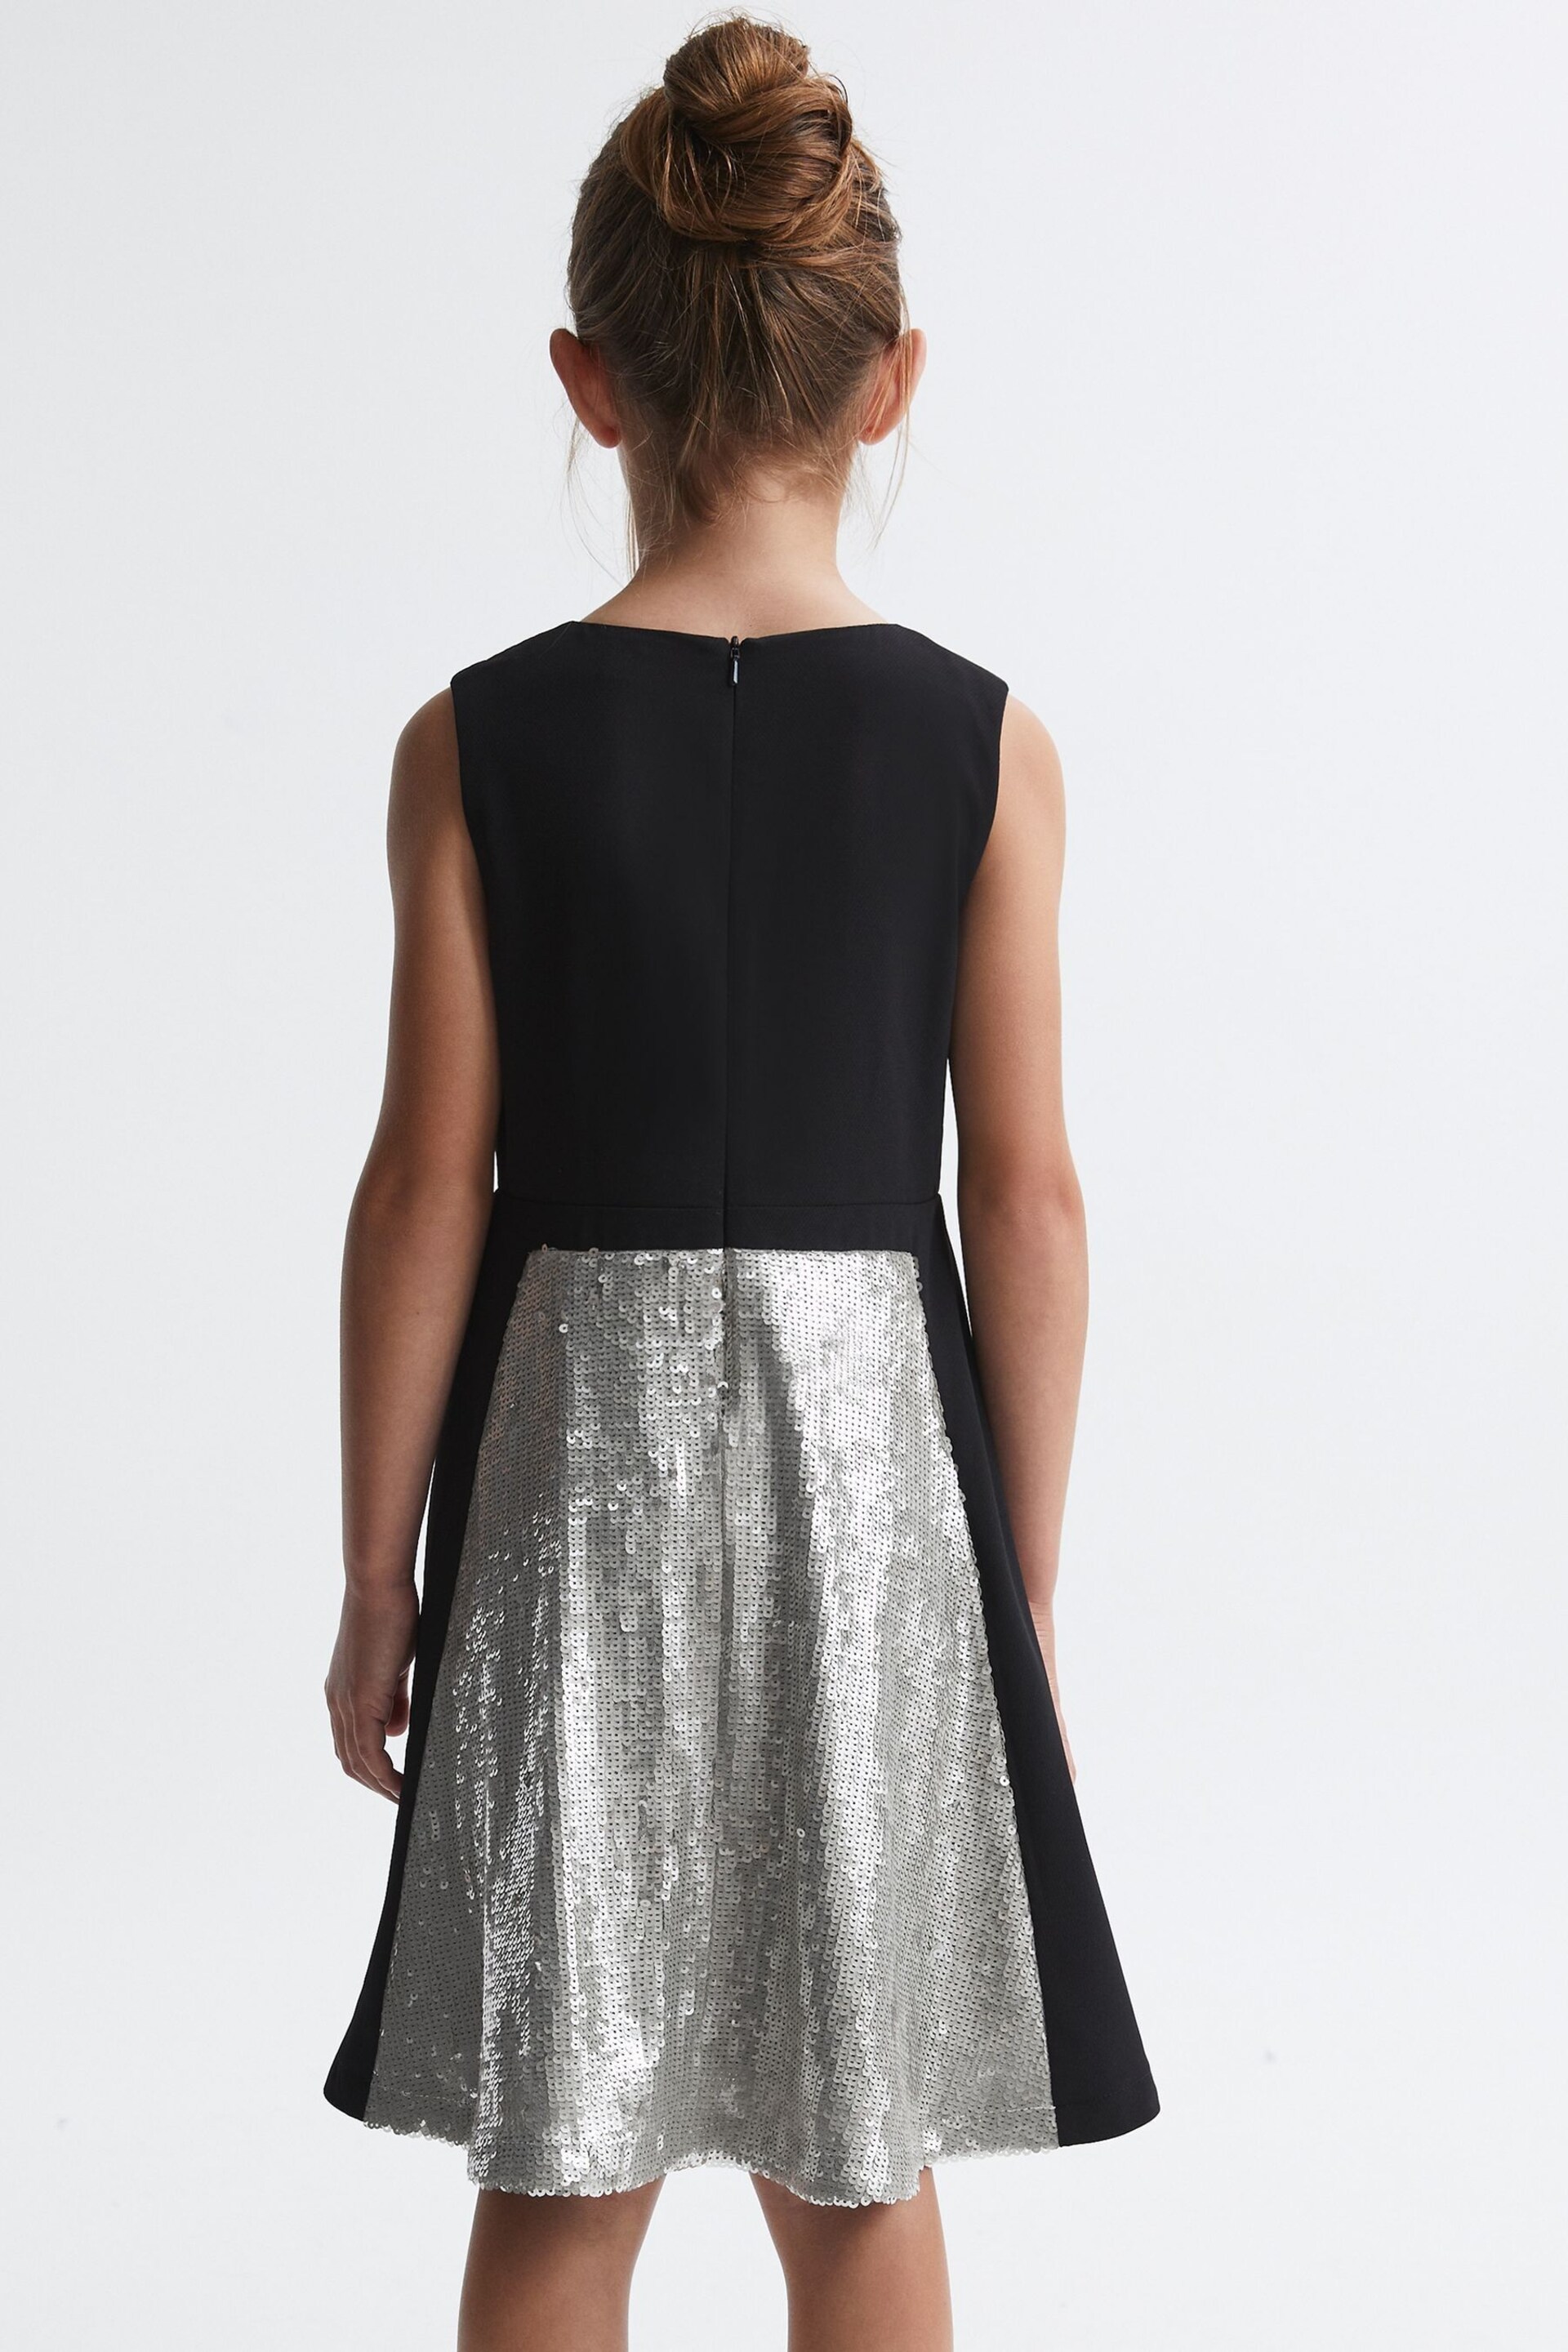 Reiss Black Libra Junior Relaxed Fit Sequin Dress - Image 4 of 5